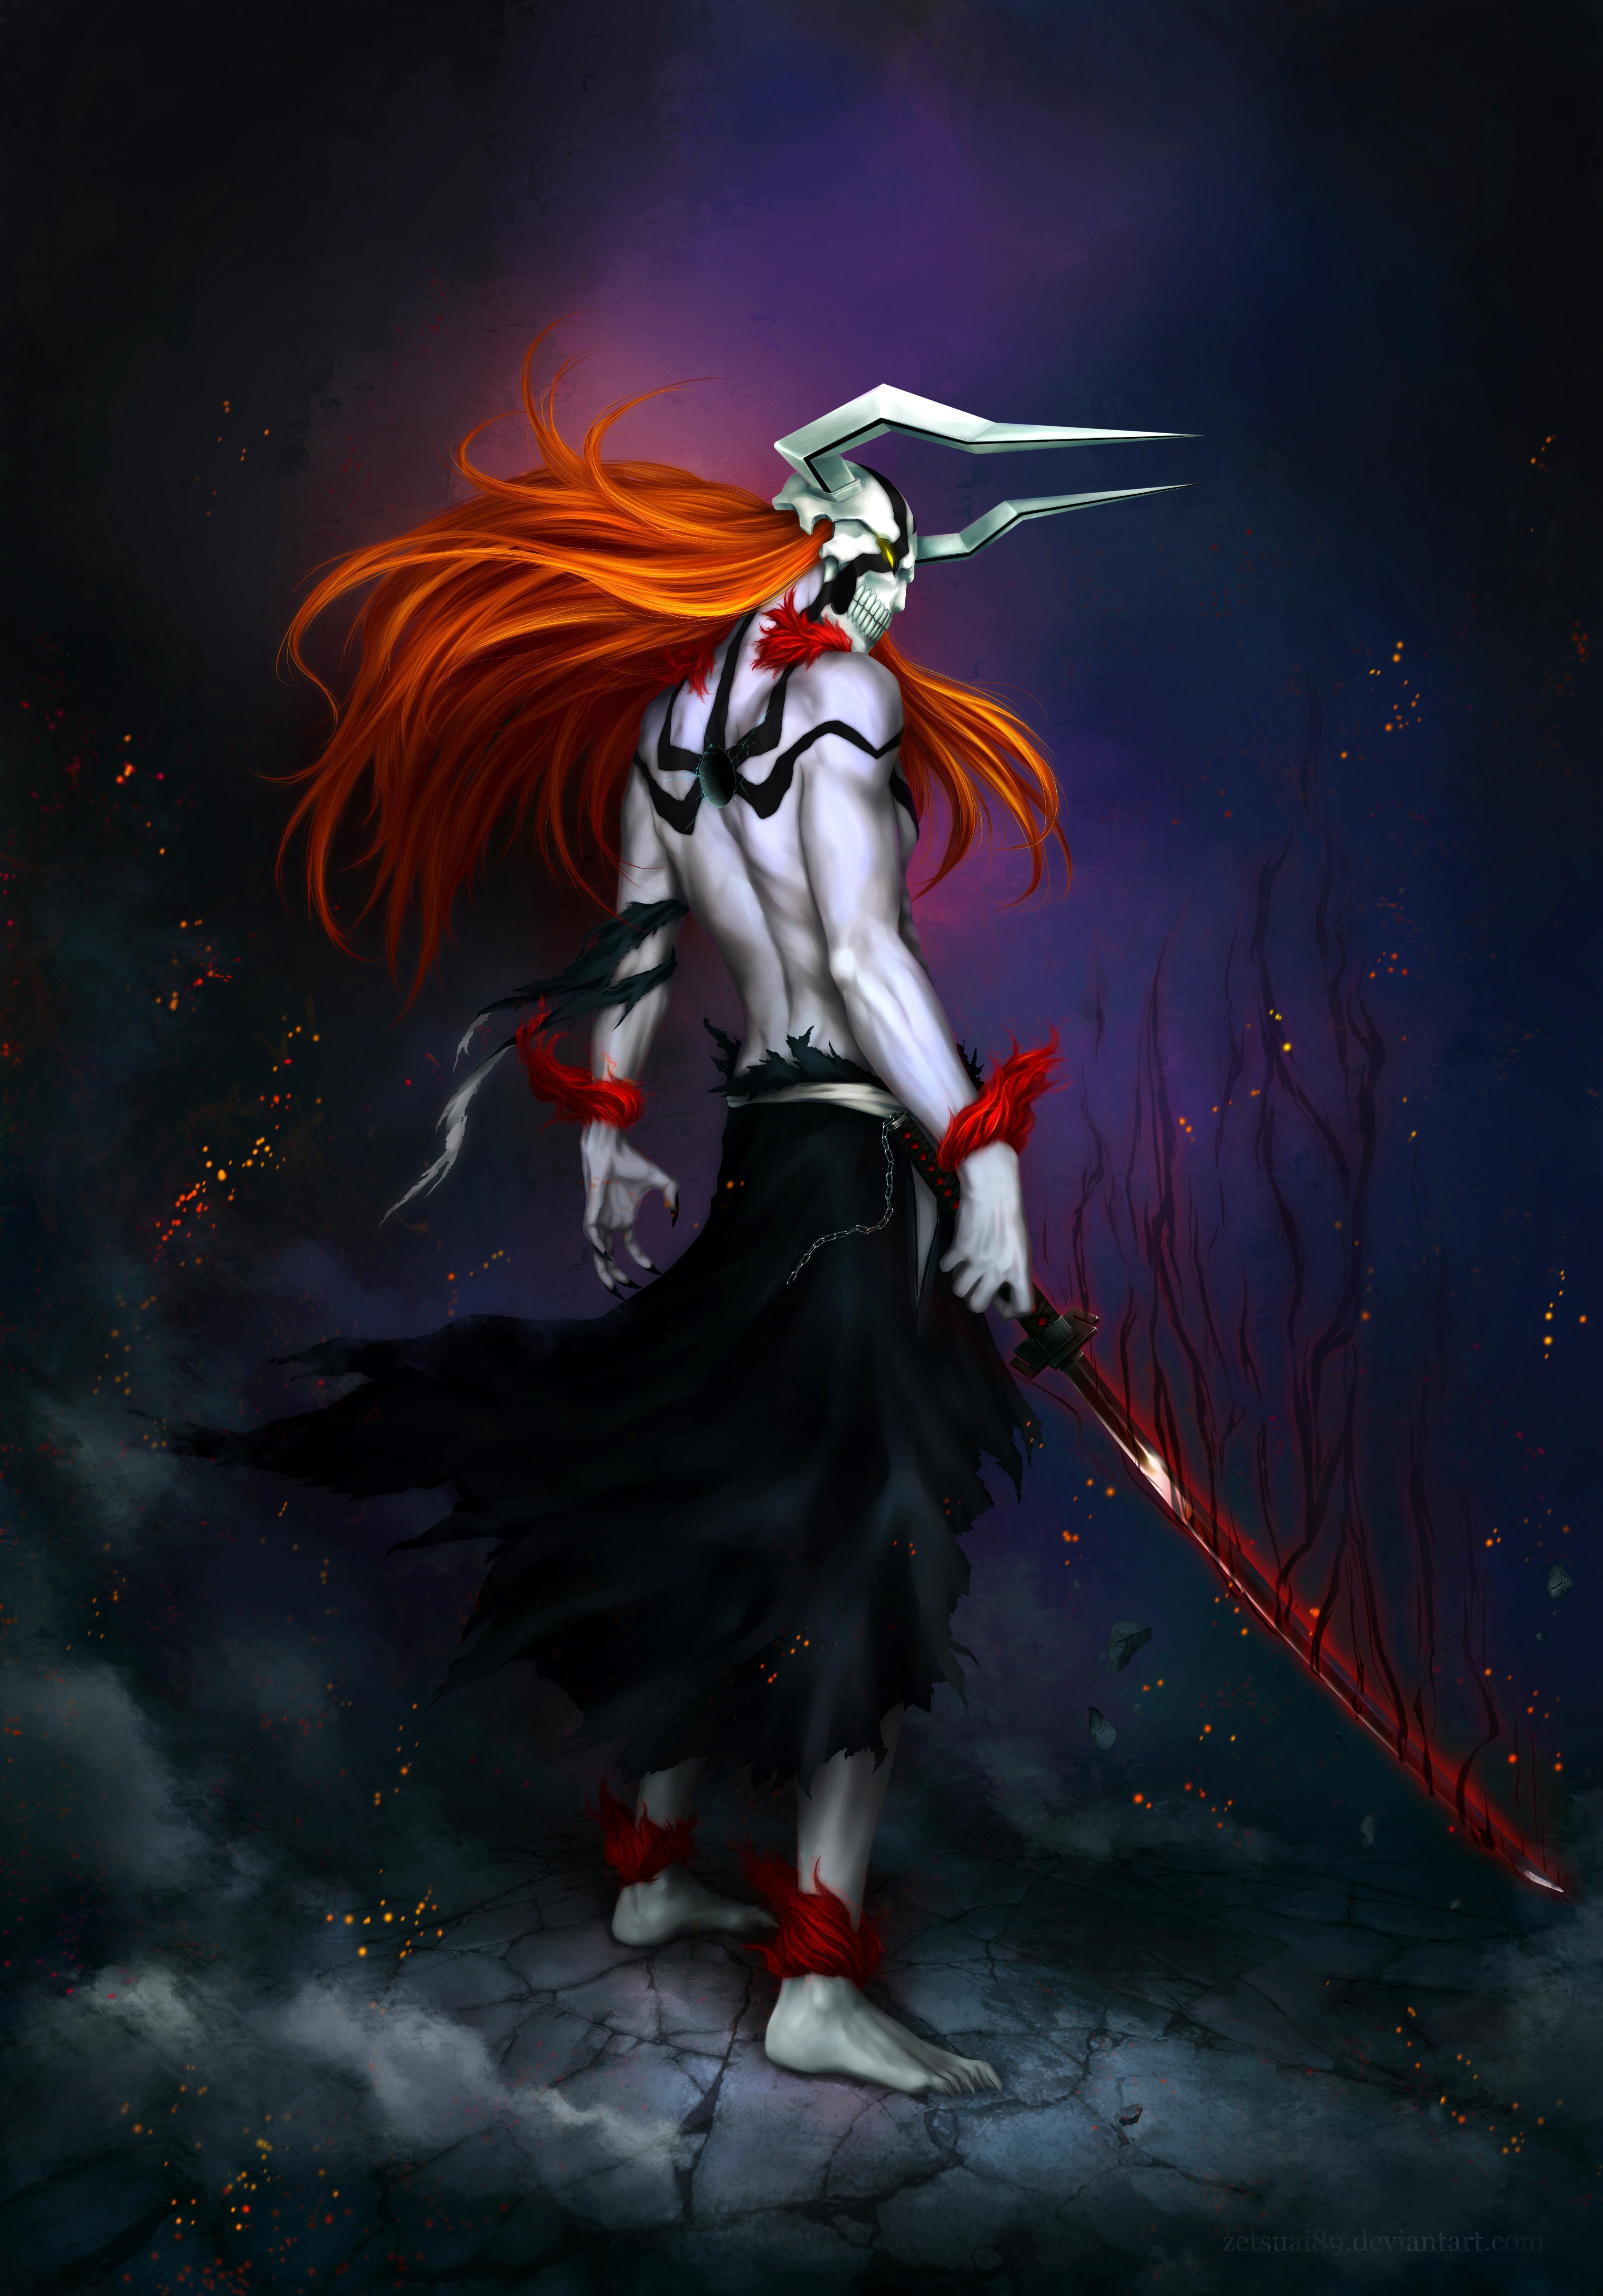 Bleach Hollow Wallpaper Android - Santinime